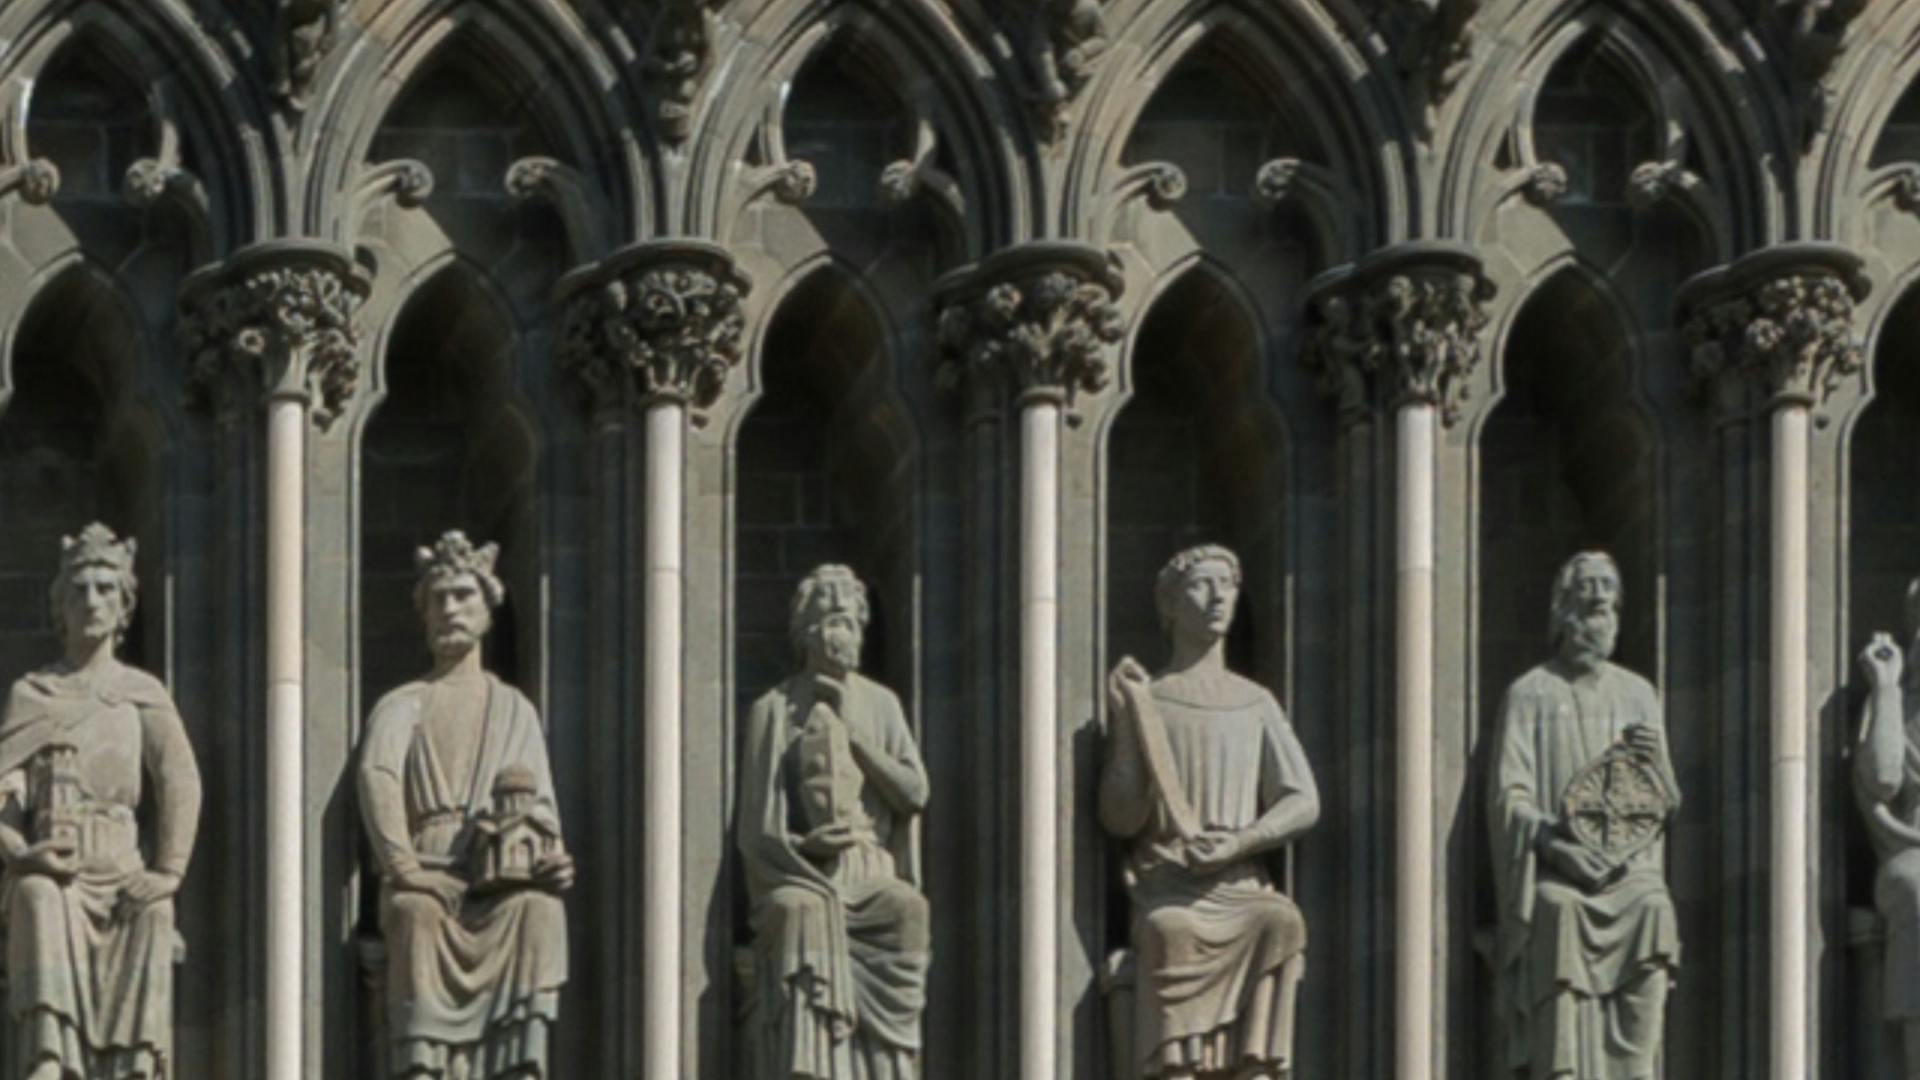 A series of statues from a Norwegian cathedral